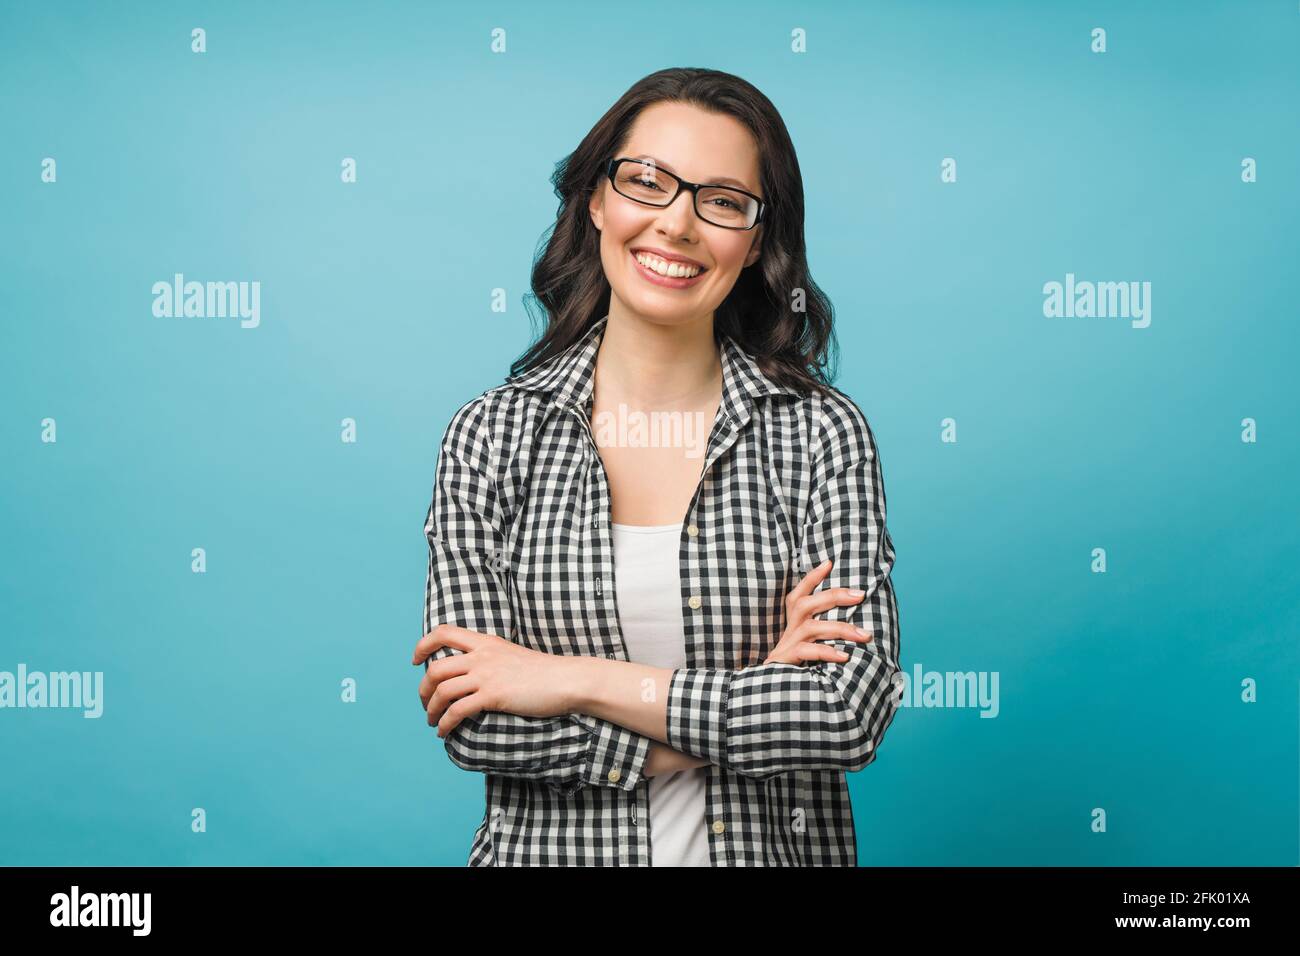 Business portrait of a young woman. A smiling brunette with glasses looks at the camera, her arms crossed over her chest. Stock Photo